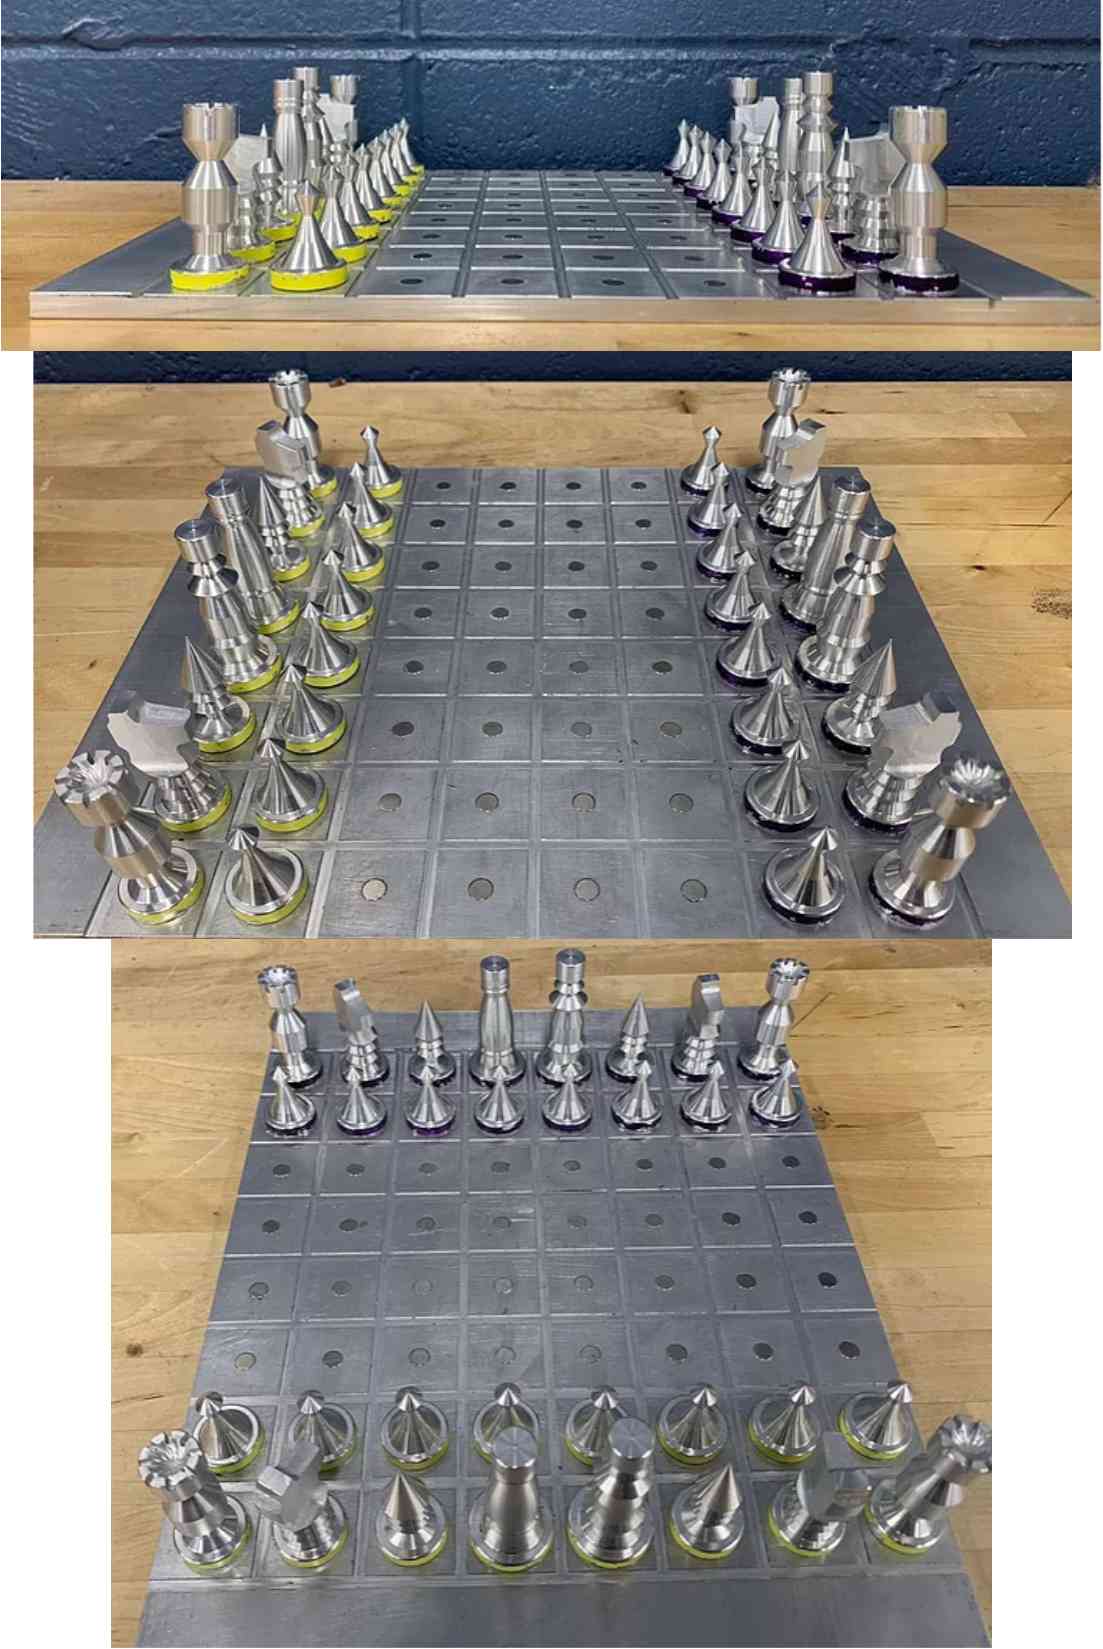 Magnetic Chess Board Image